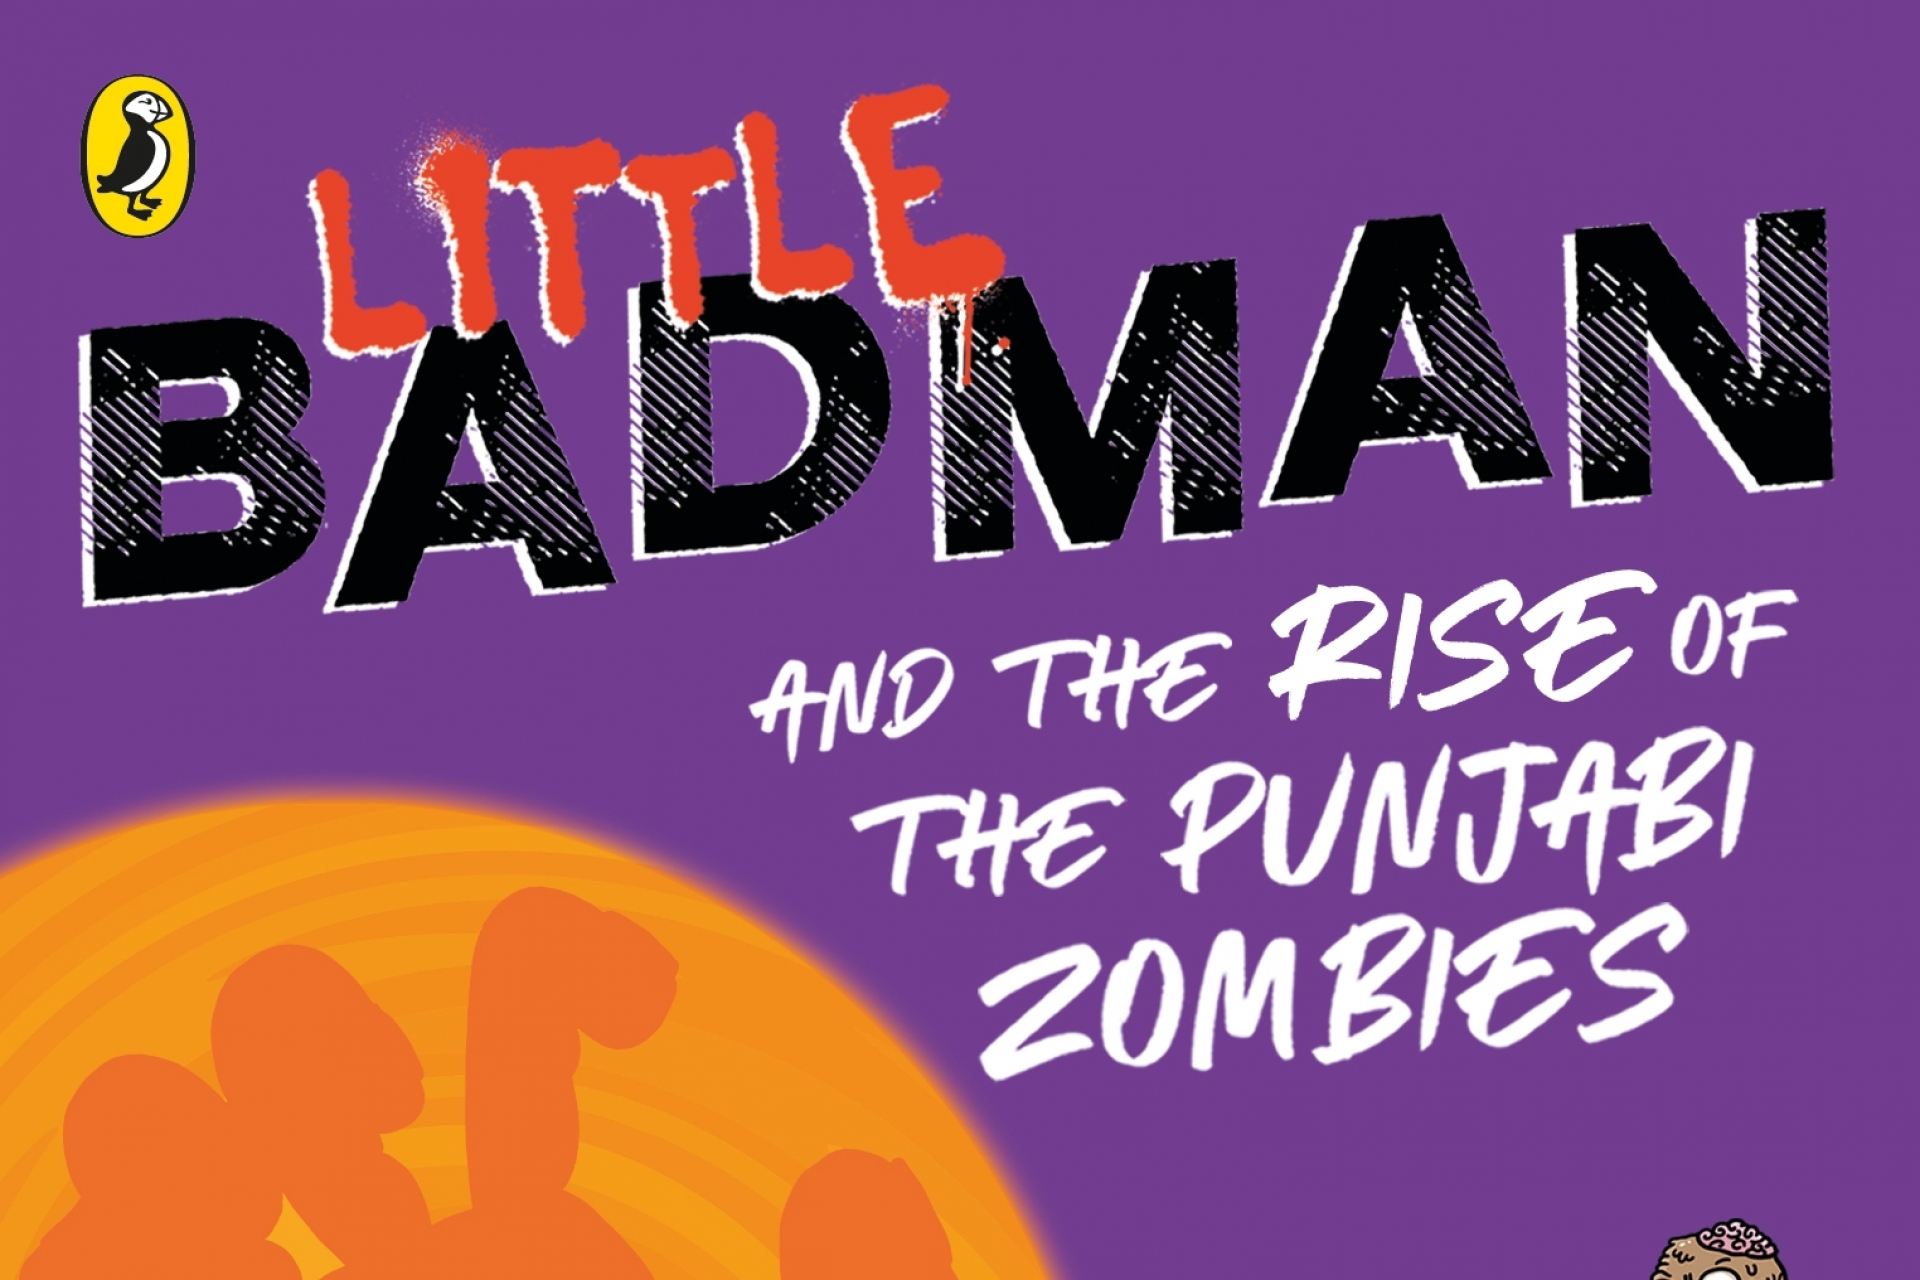 Little Badman by Humza Arshad and Henry White